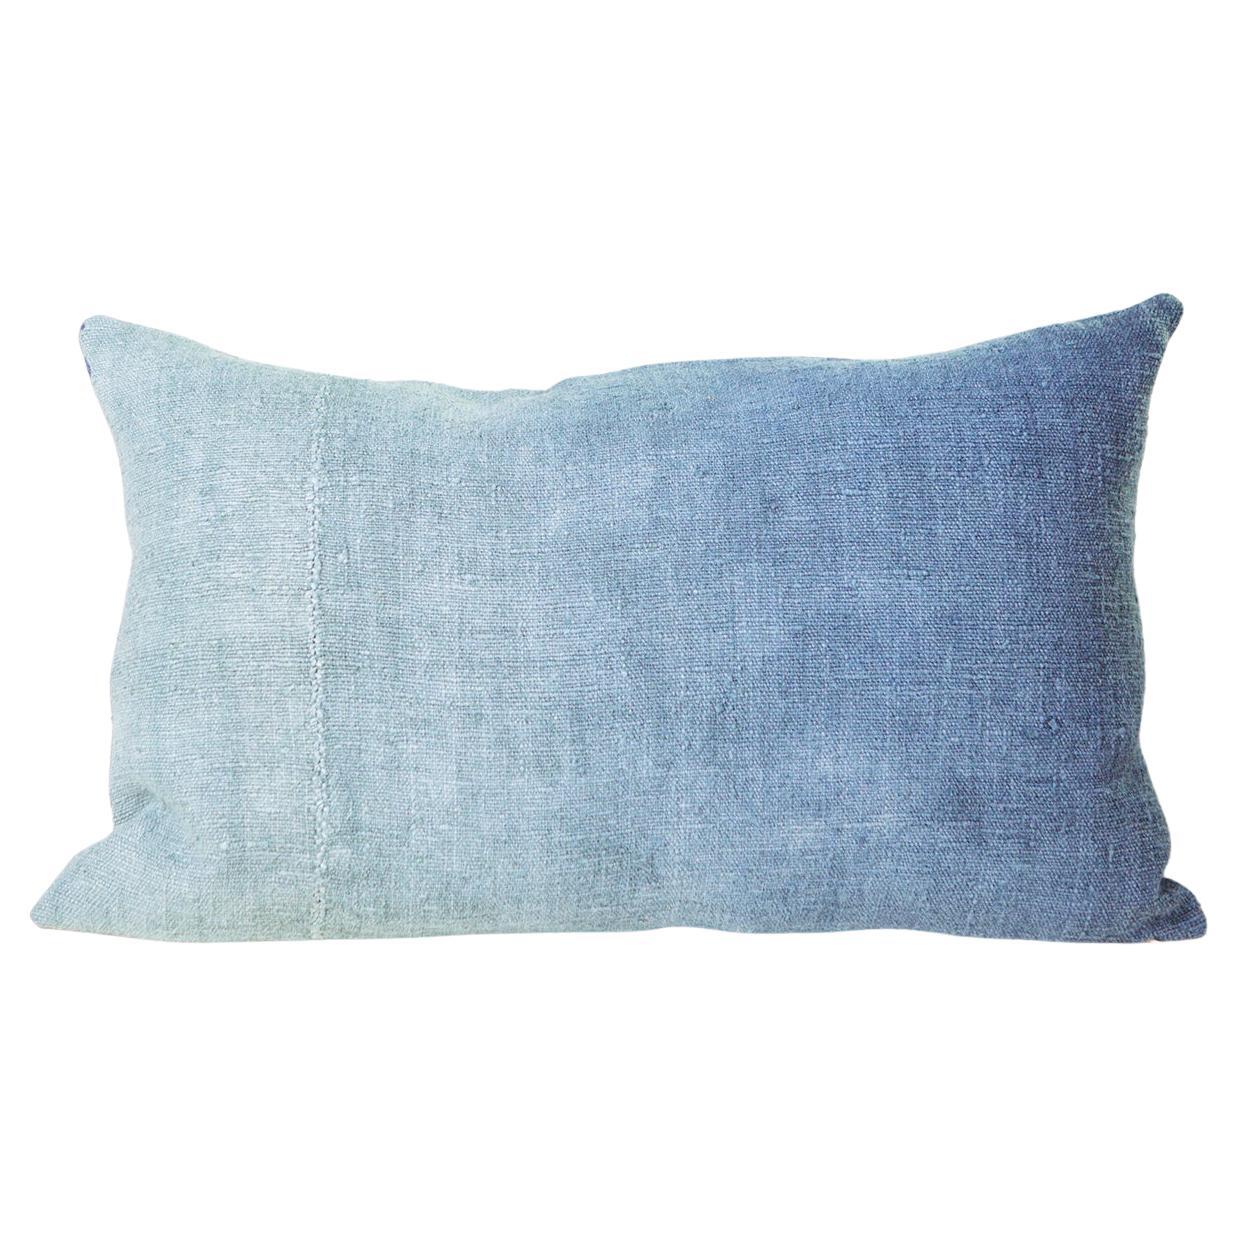 Espanyolet Hand-Painted Vintage Linen Throw Pillow in Blue 16"x26"